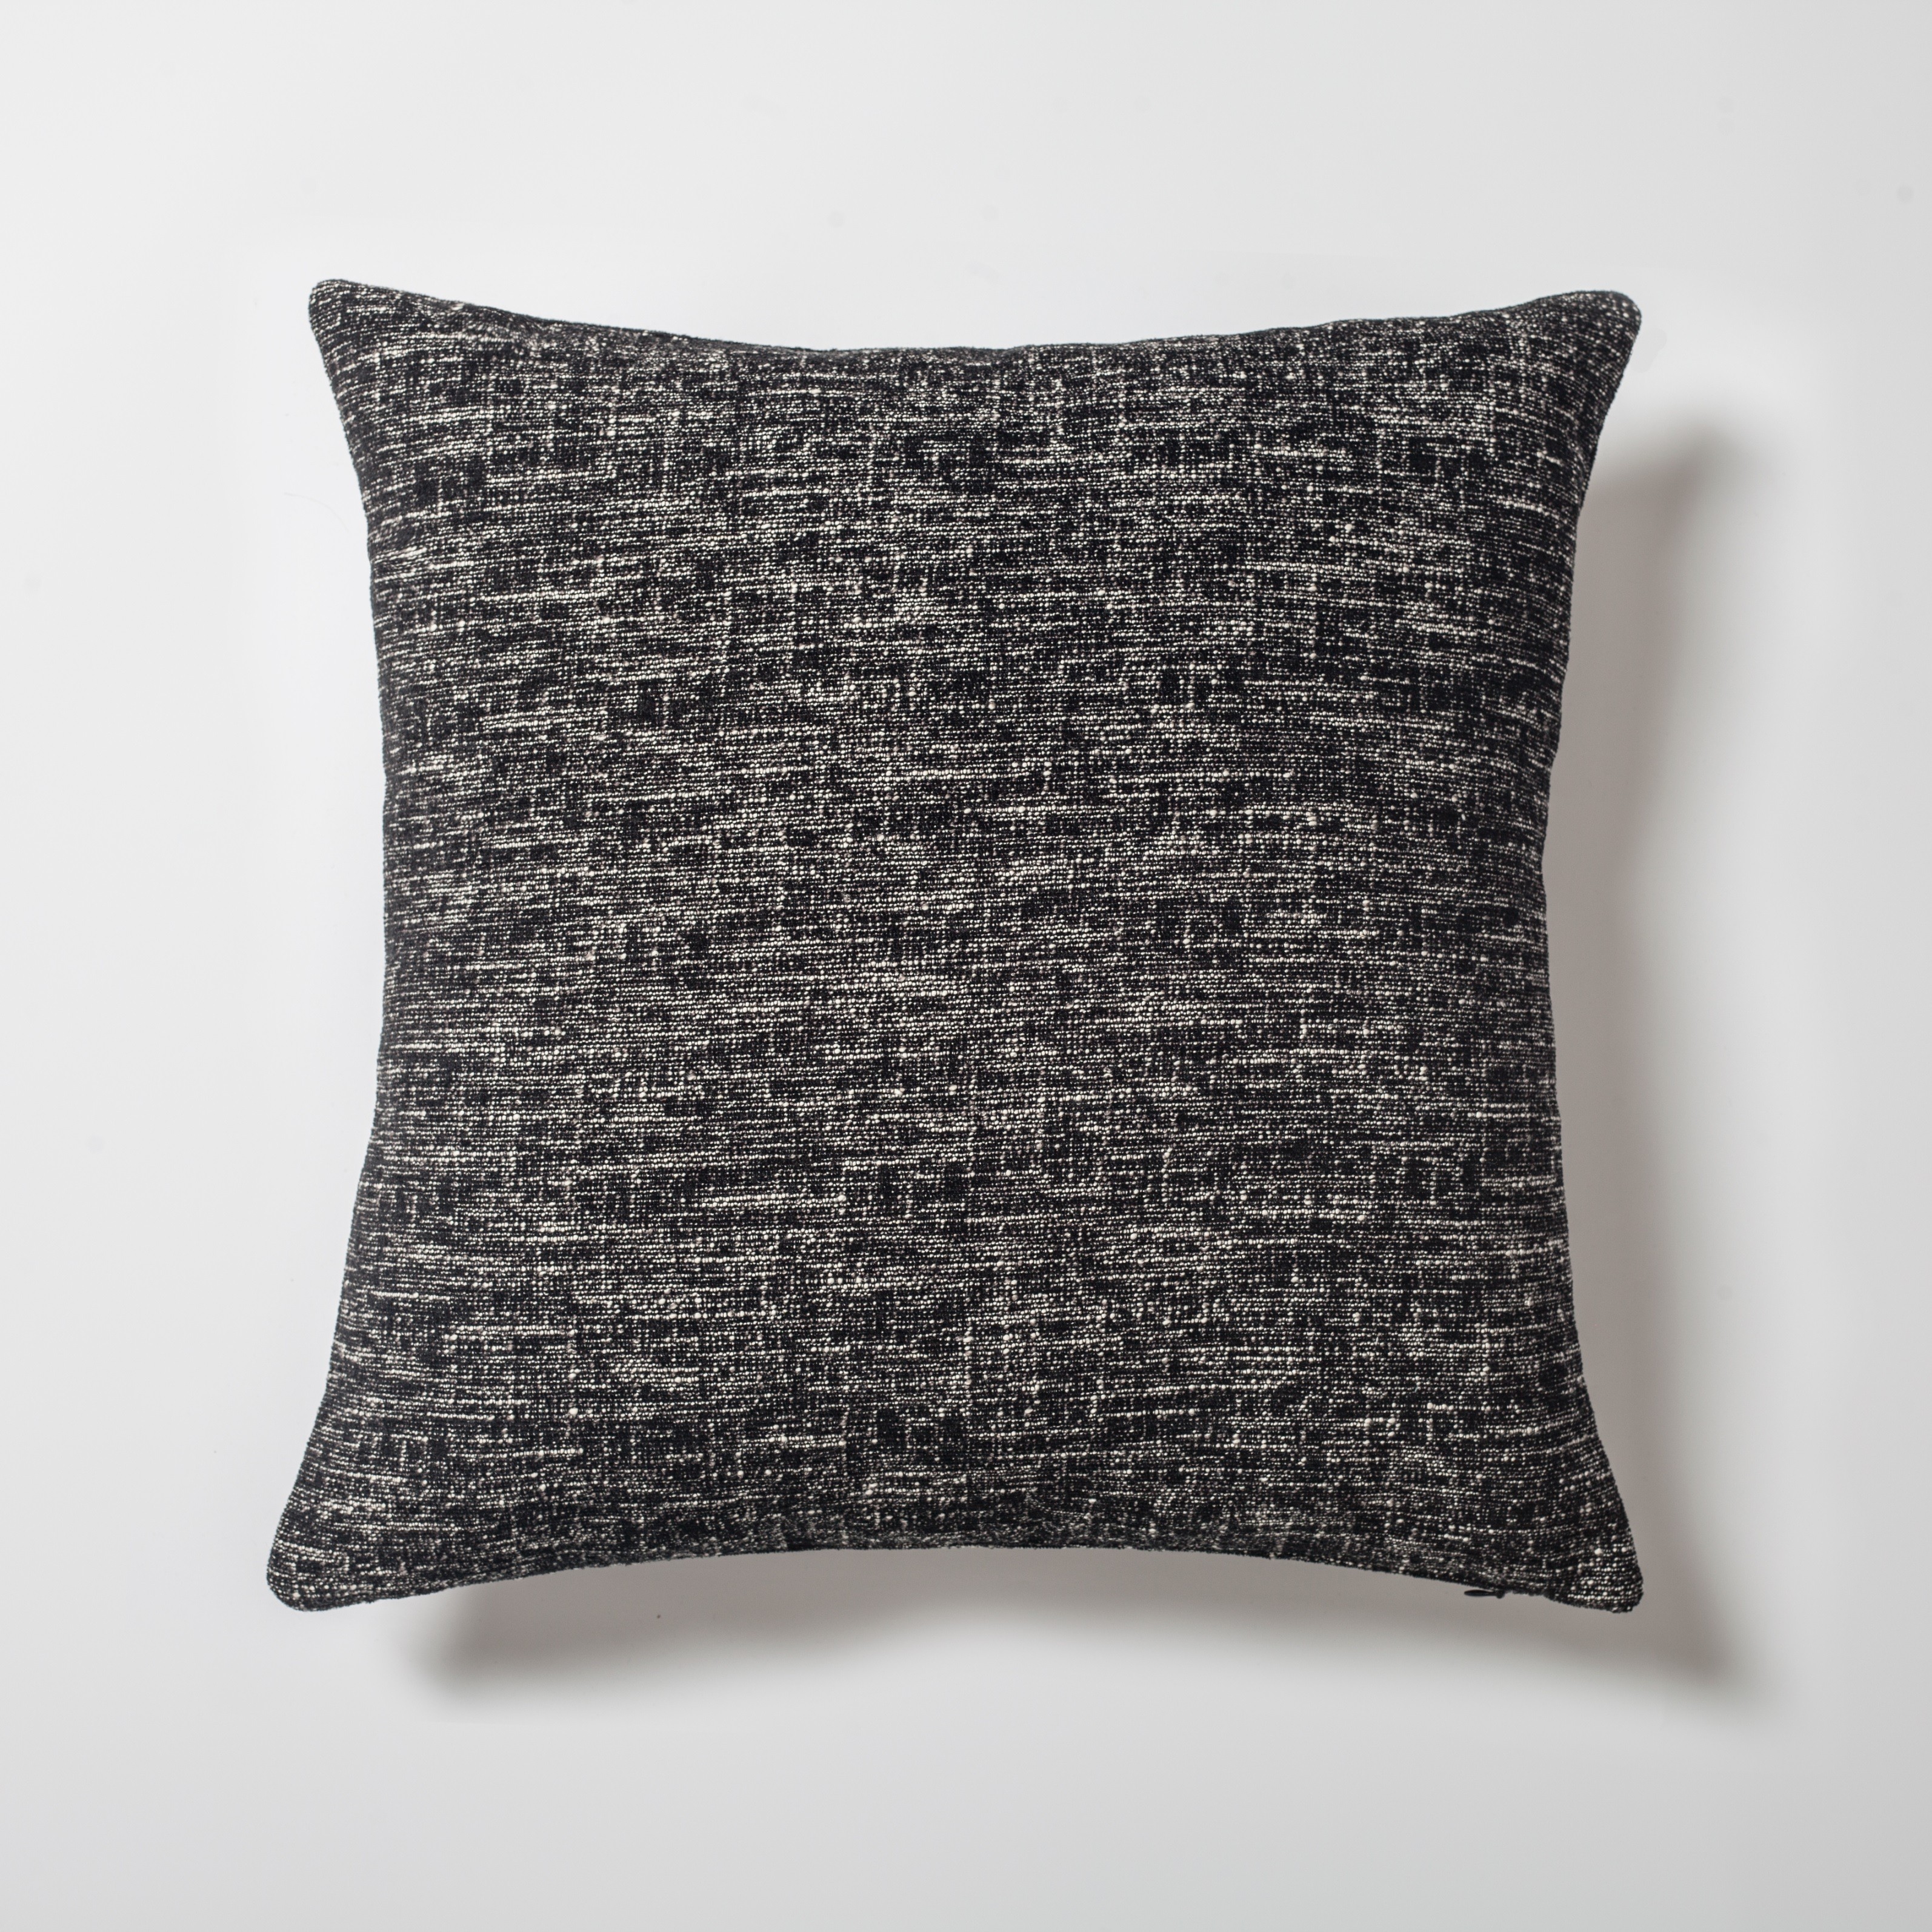 "Flap" - Textured Linen Pillow 20x20 Inch - Black (Cover Only)